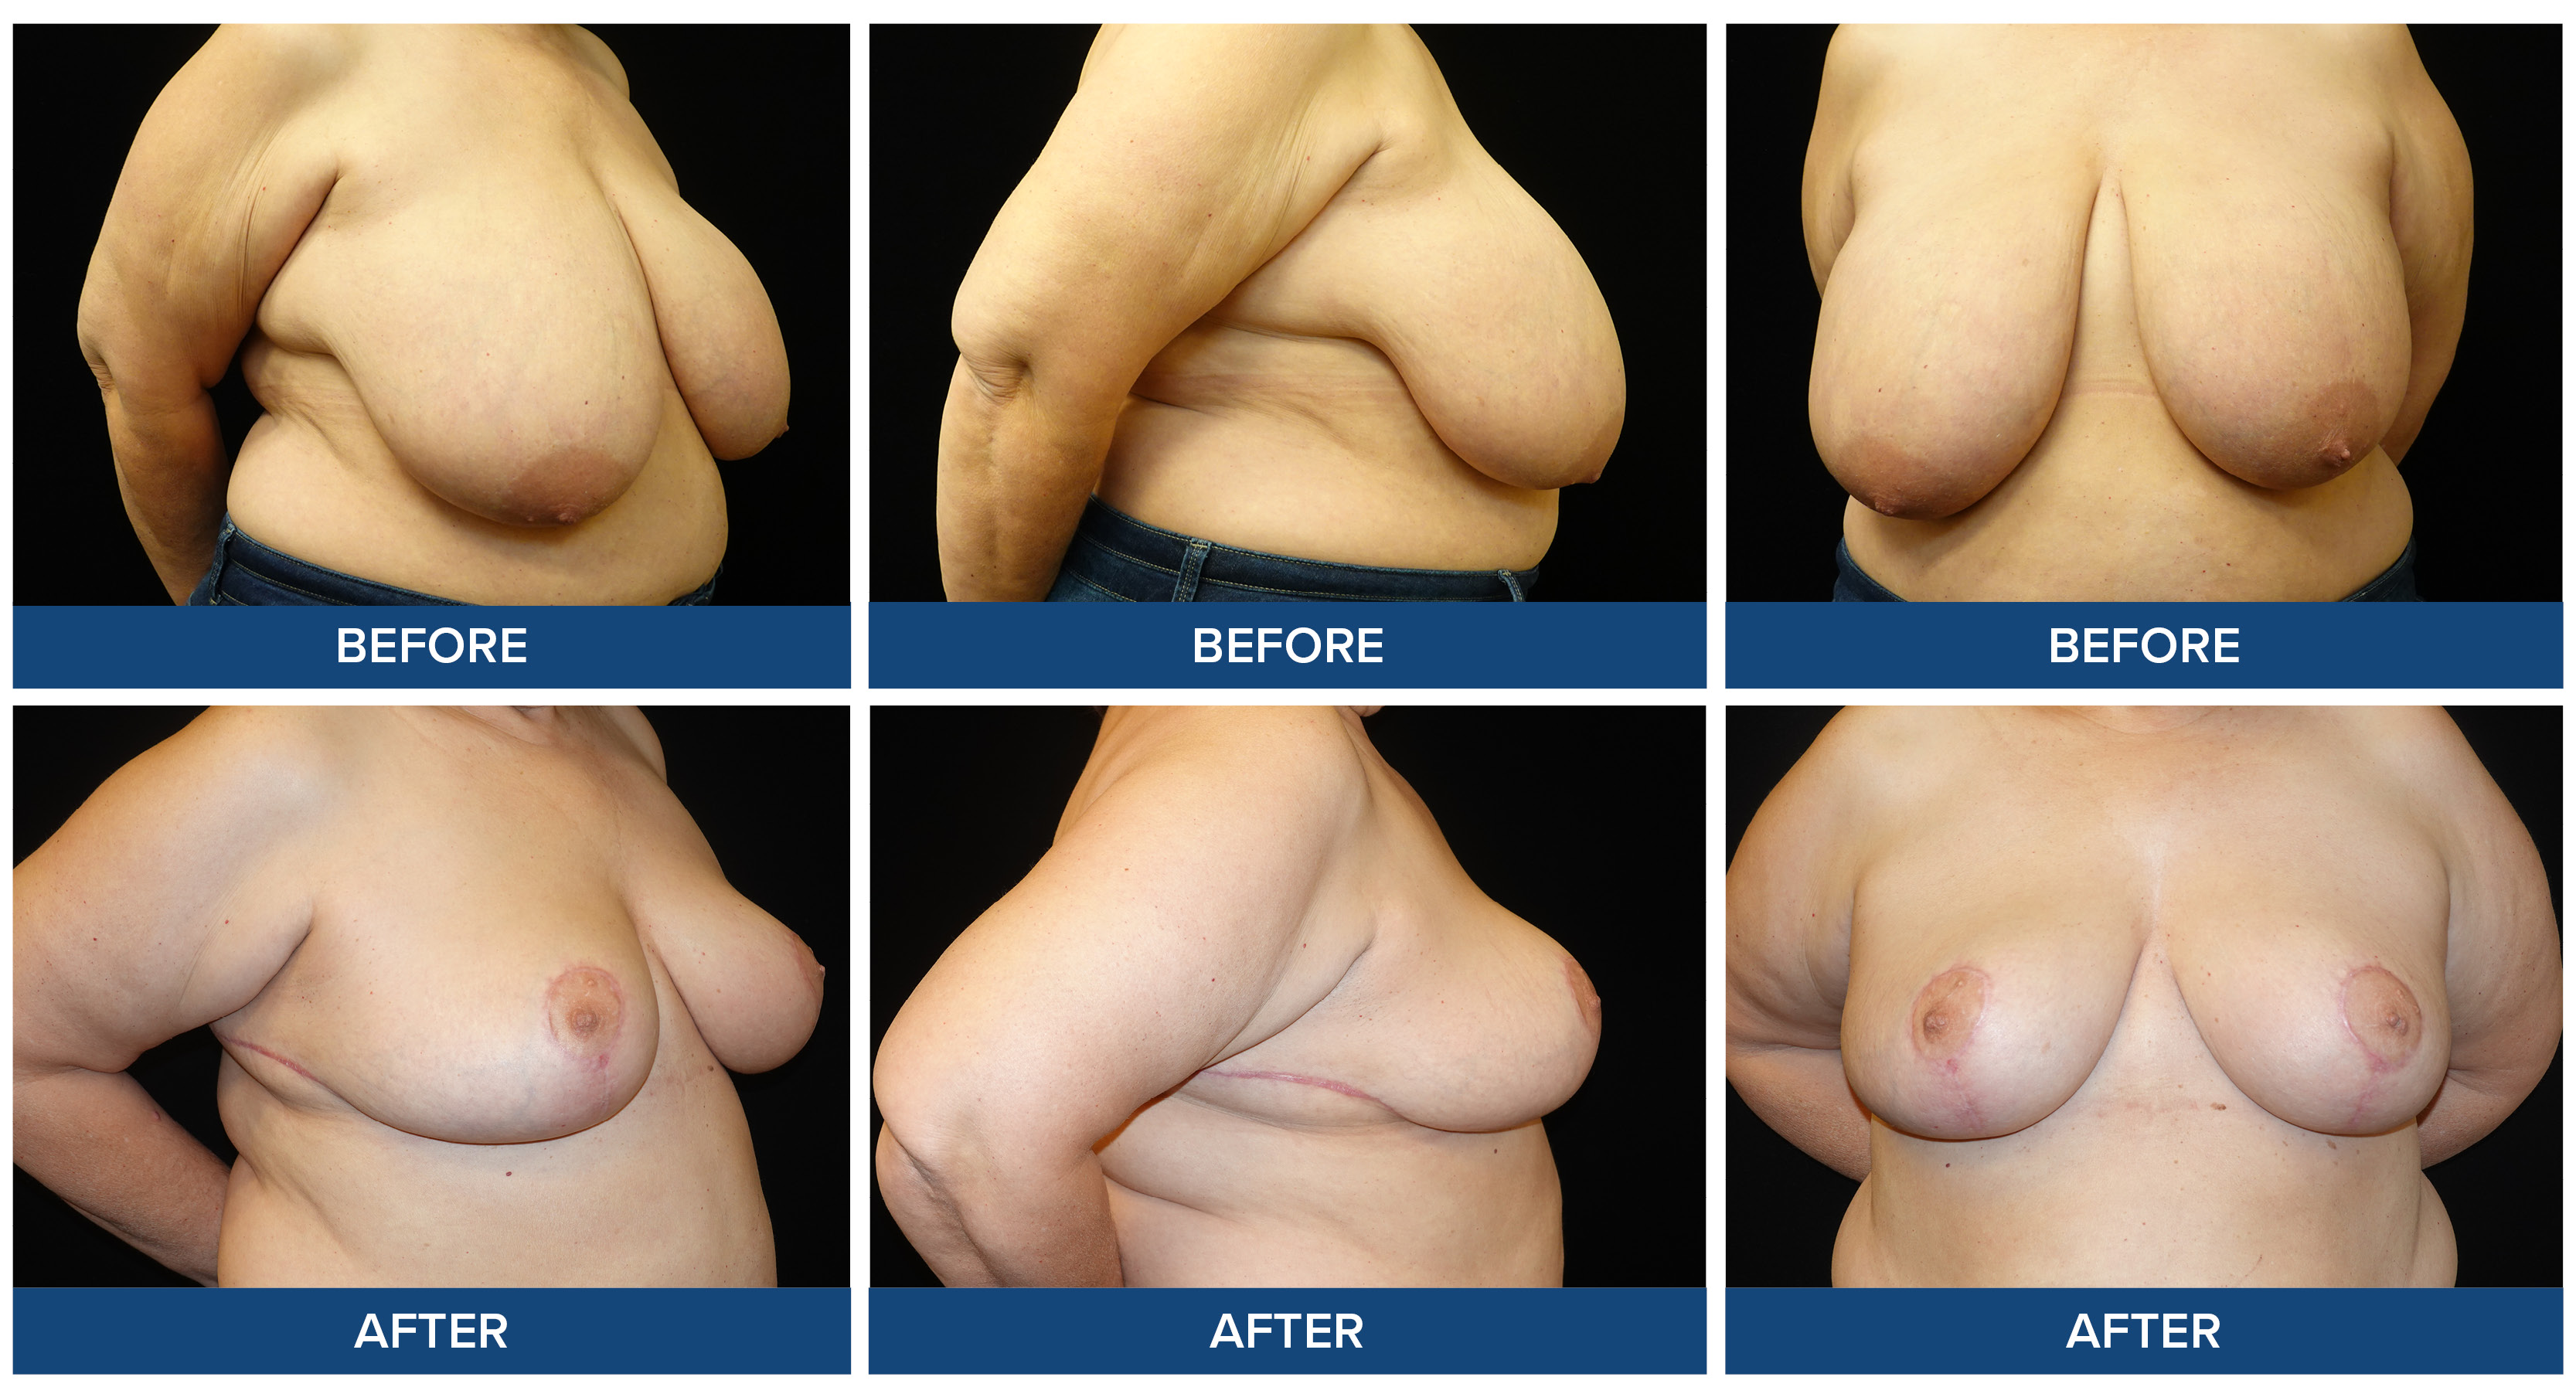 Before and after photos of a female patient breast reduction procedure.